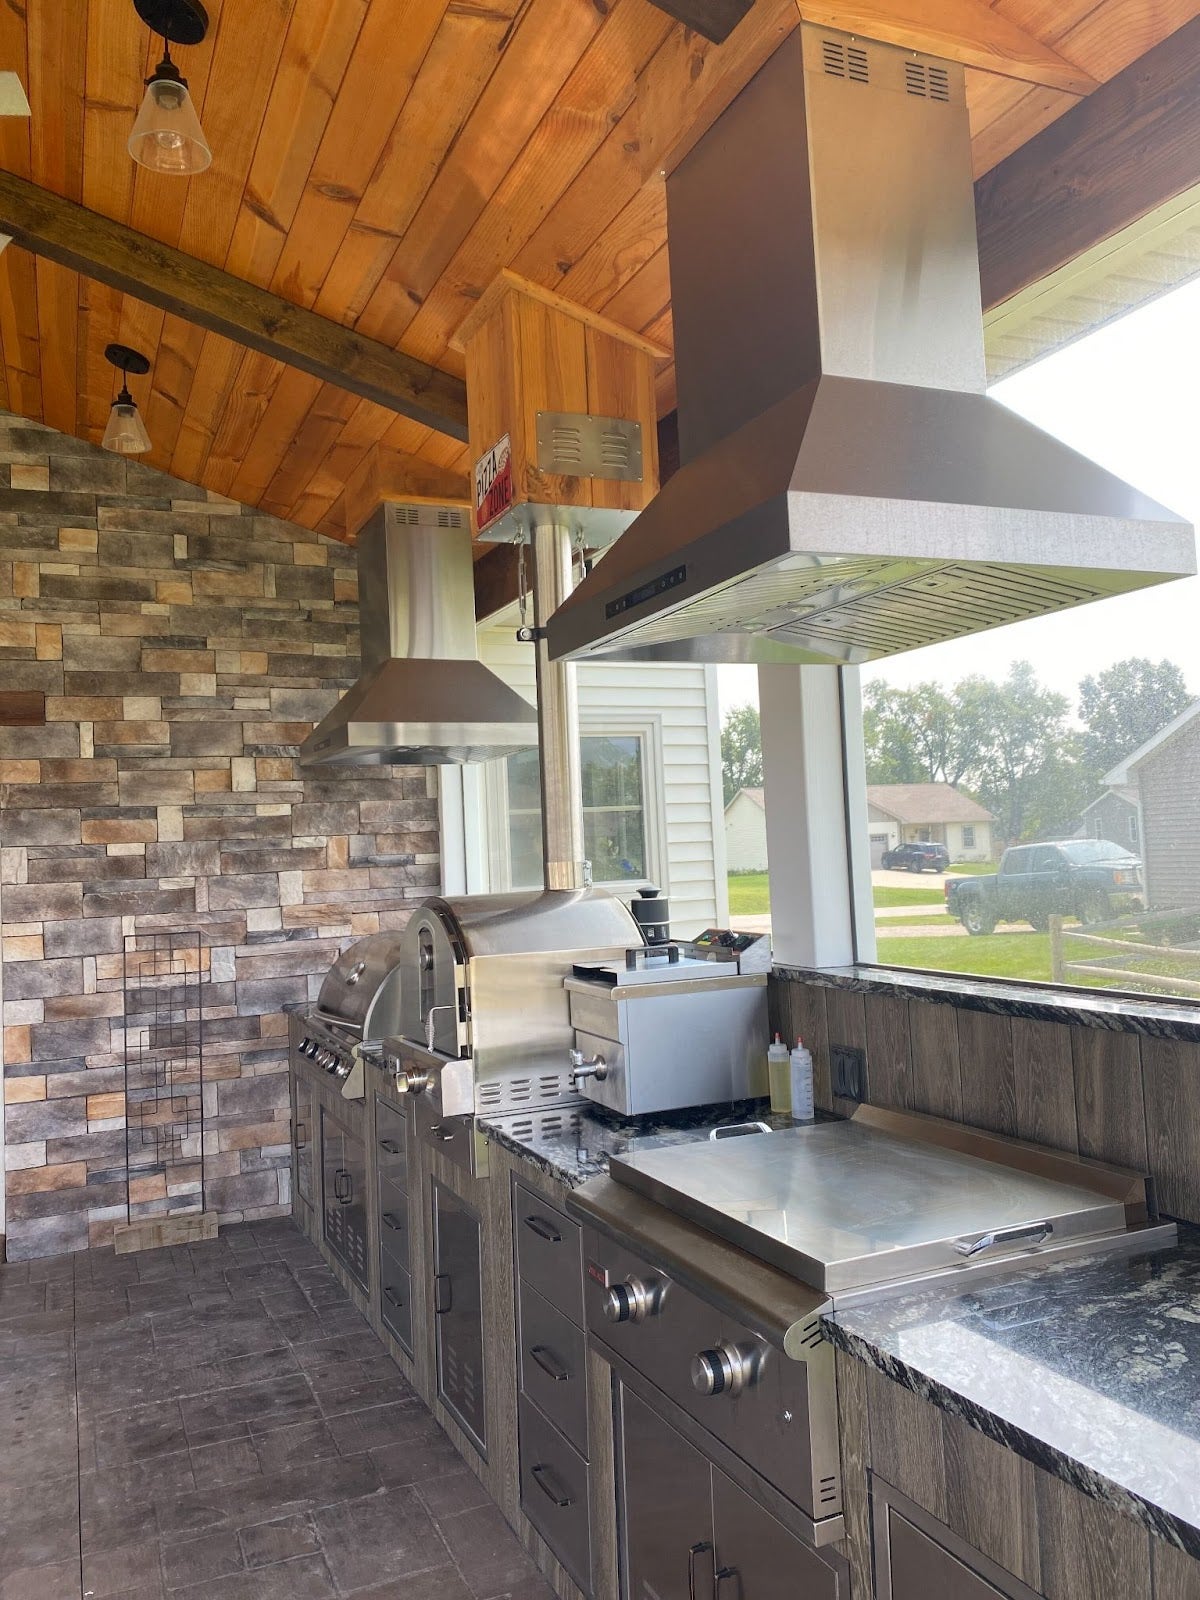 Sophisticated backyard kitchen setup featuring a built-in barbecue, smoker, and storage cabinets with a view of neighborhood homes and clear skies. - Proline Range Hoods - prolinerangehoods.com 